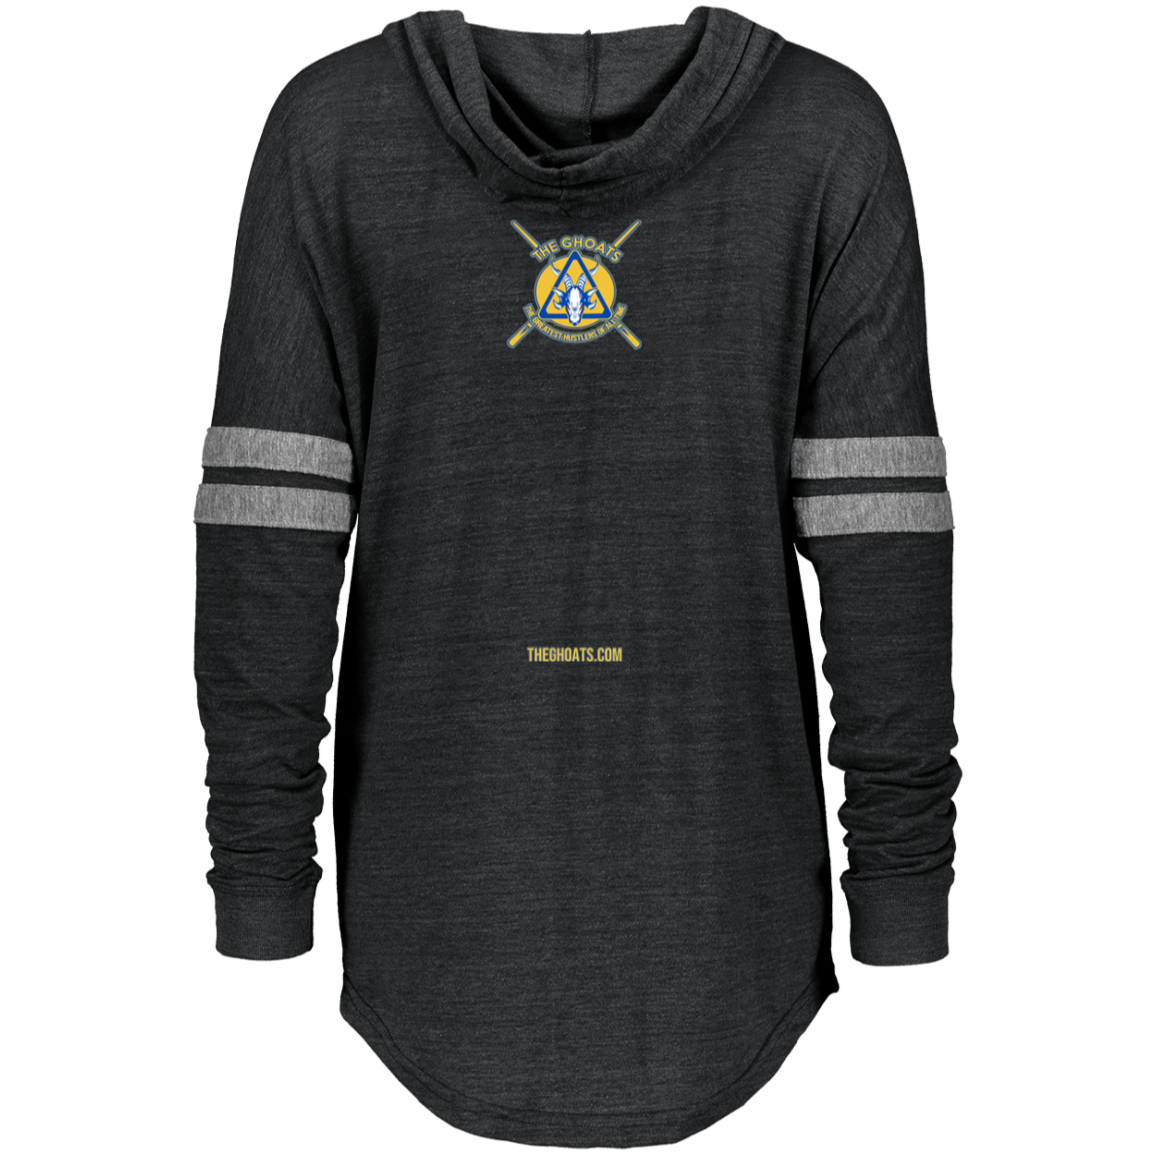 The GHOATS Custom Design. #12 GOLDEN STATE HUSTLERS.	Ladies Hooded Low Key Pullover